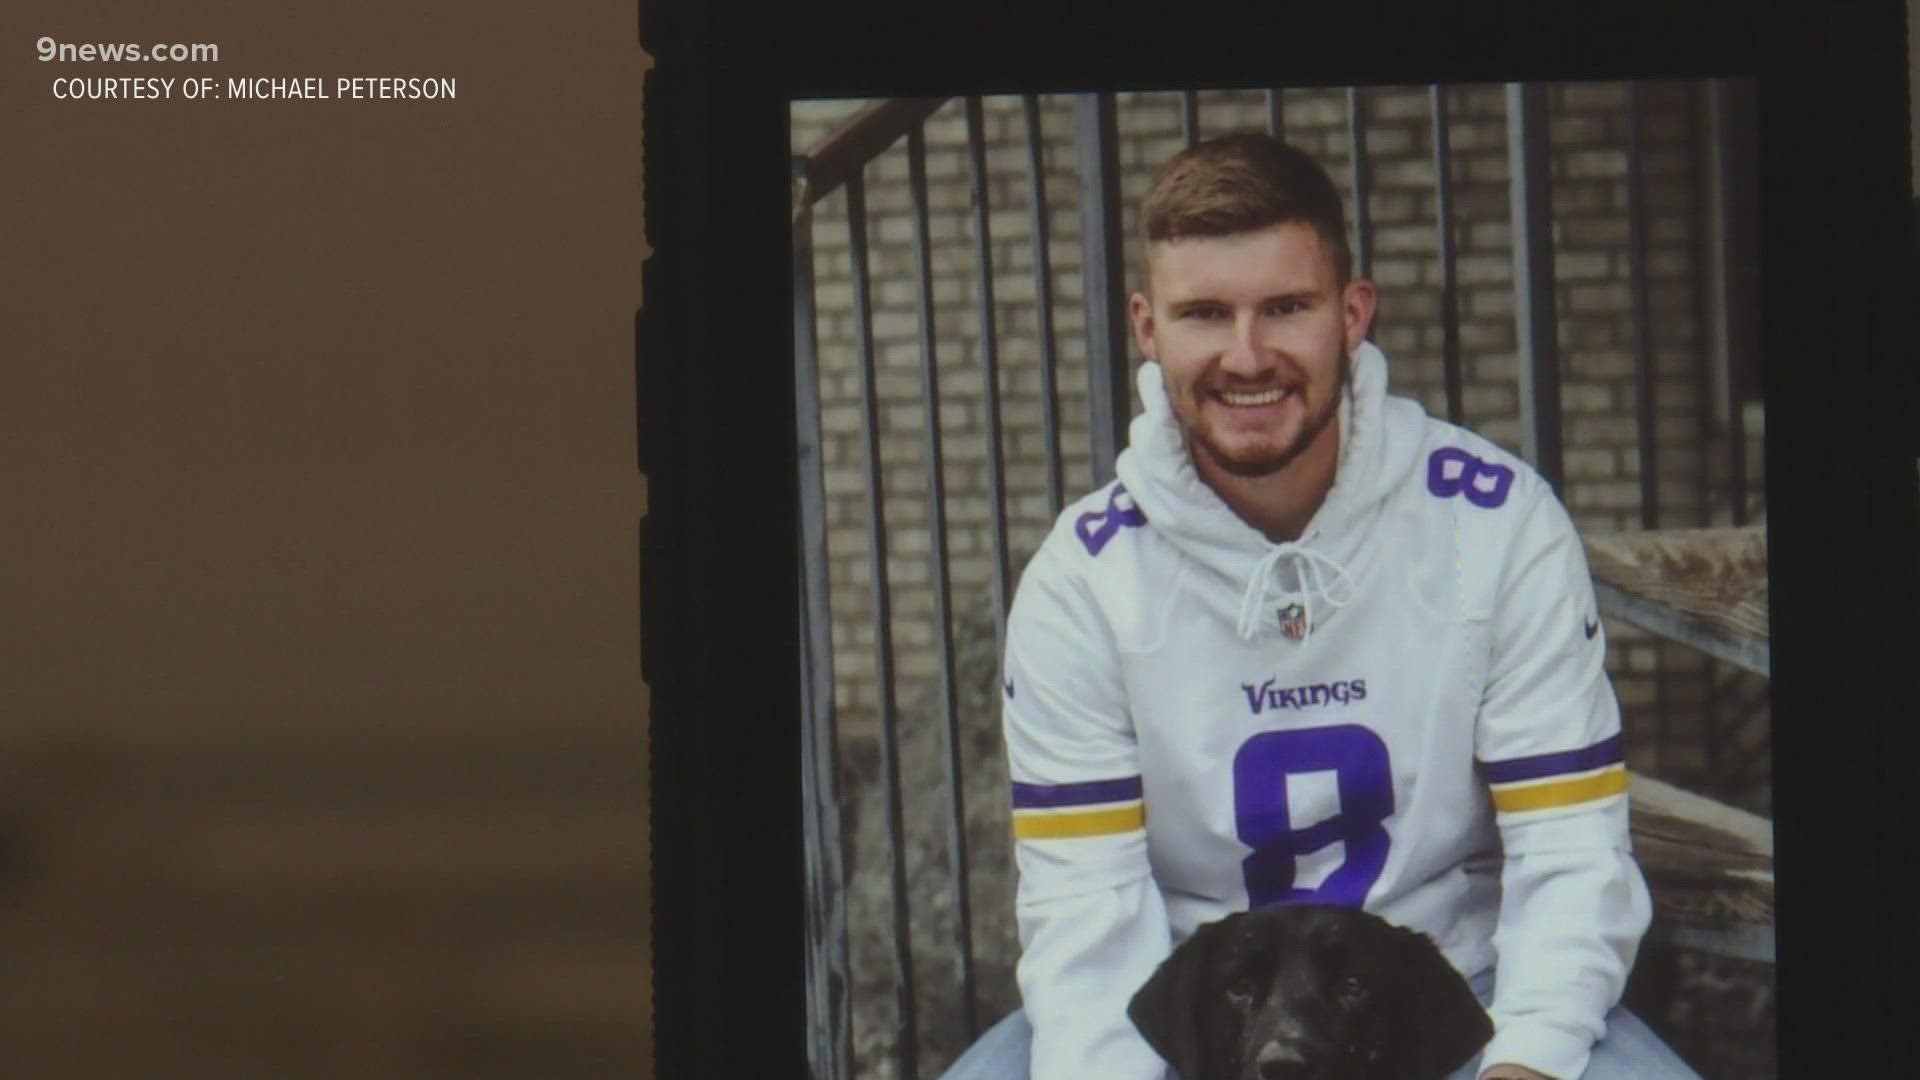 Noah Bruner, 21, was an employee and coach at Power2Play Sports. "It doesn't matter what sport you play. He reached out in kindness to everyone," his boss said.